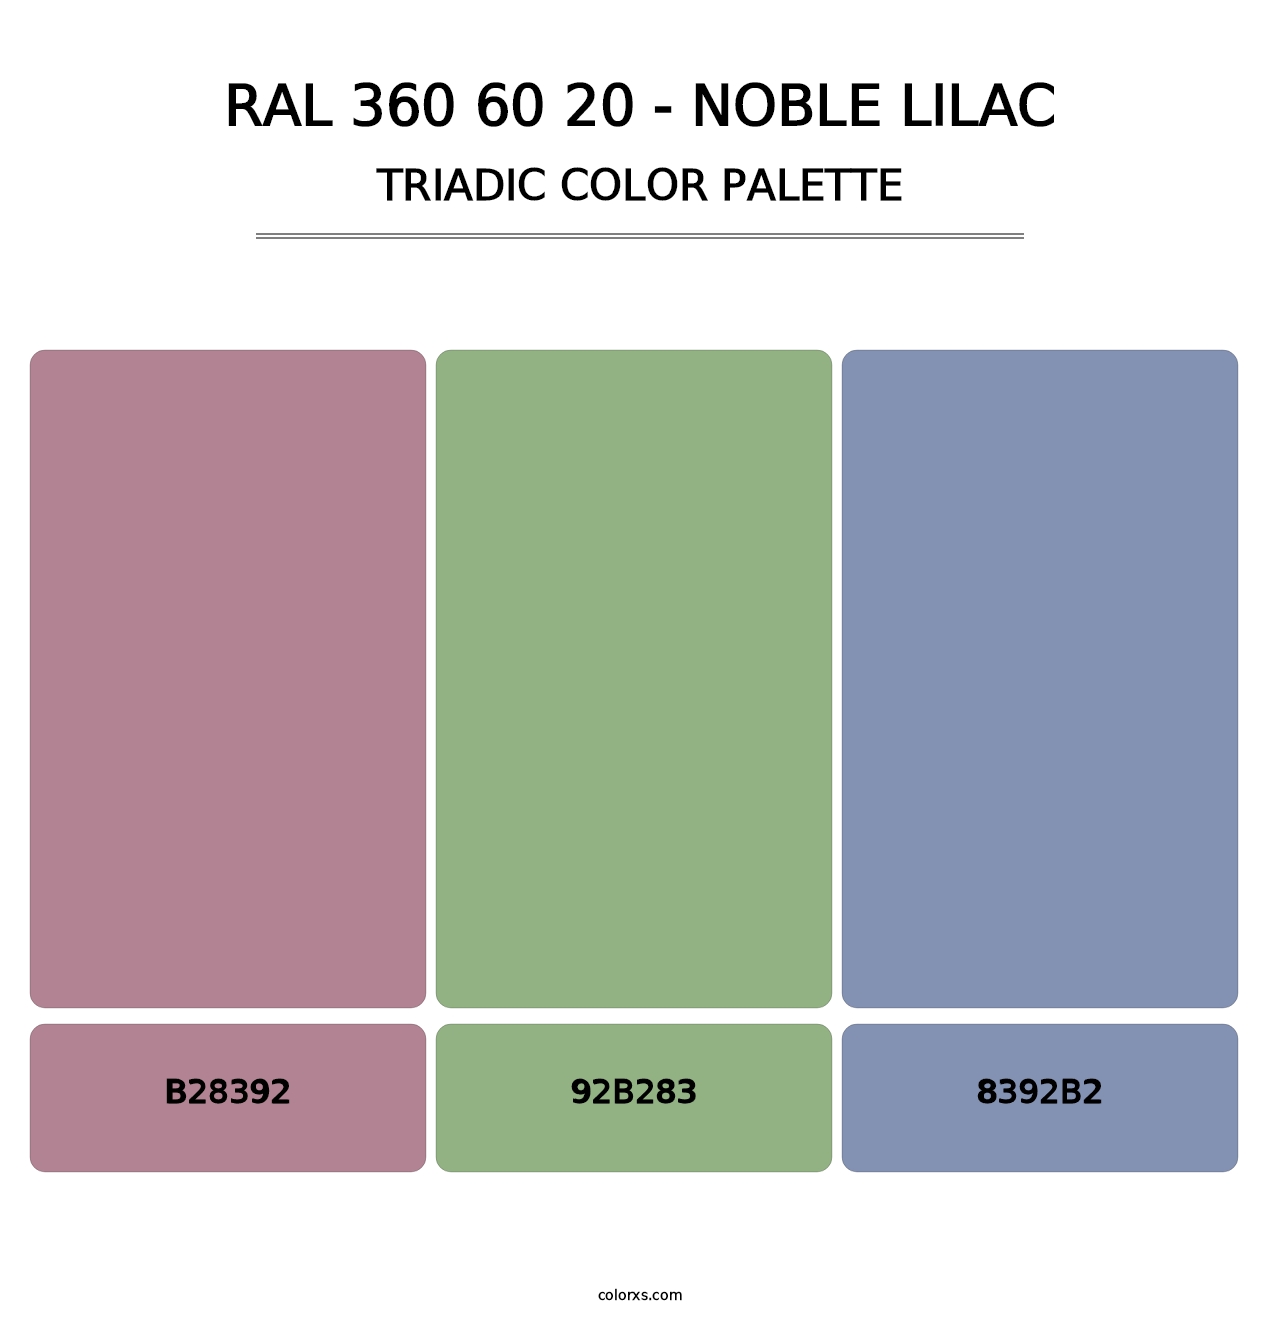 RAL 360 60 20 - Noble Lilac - Triadic Color Palette